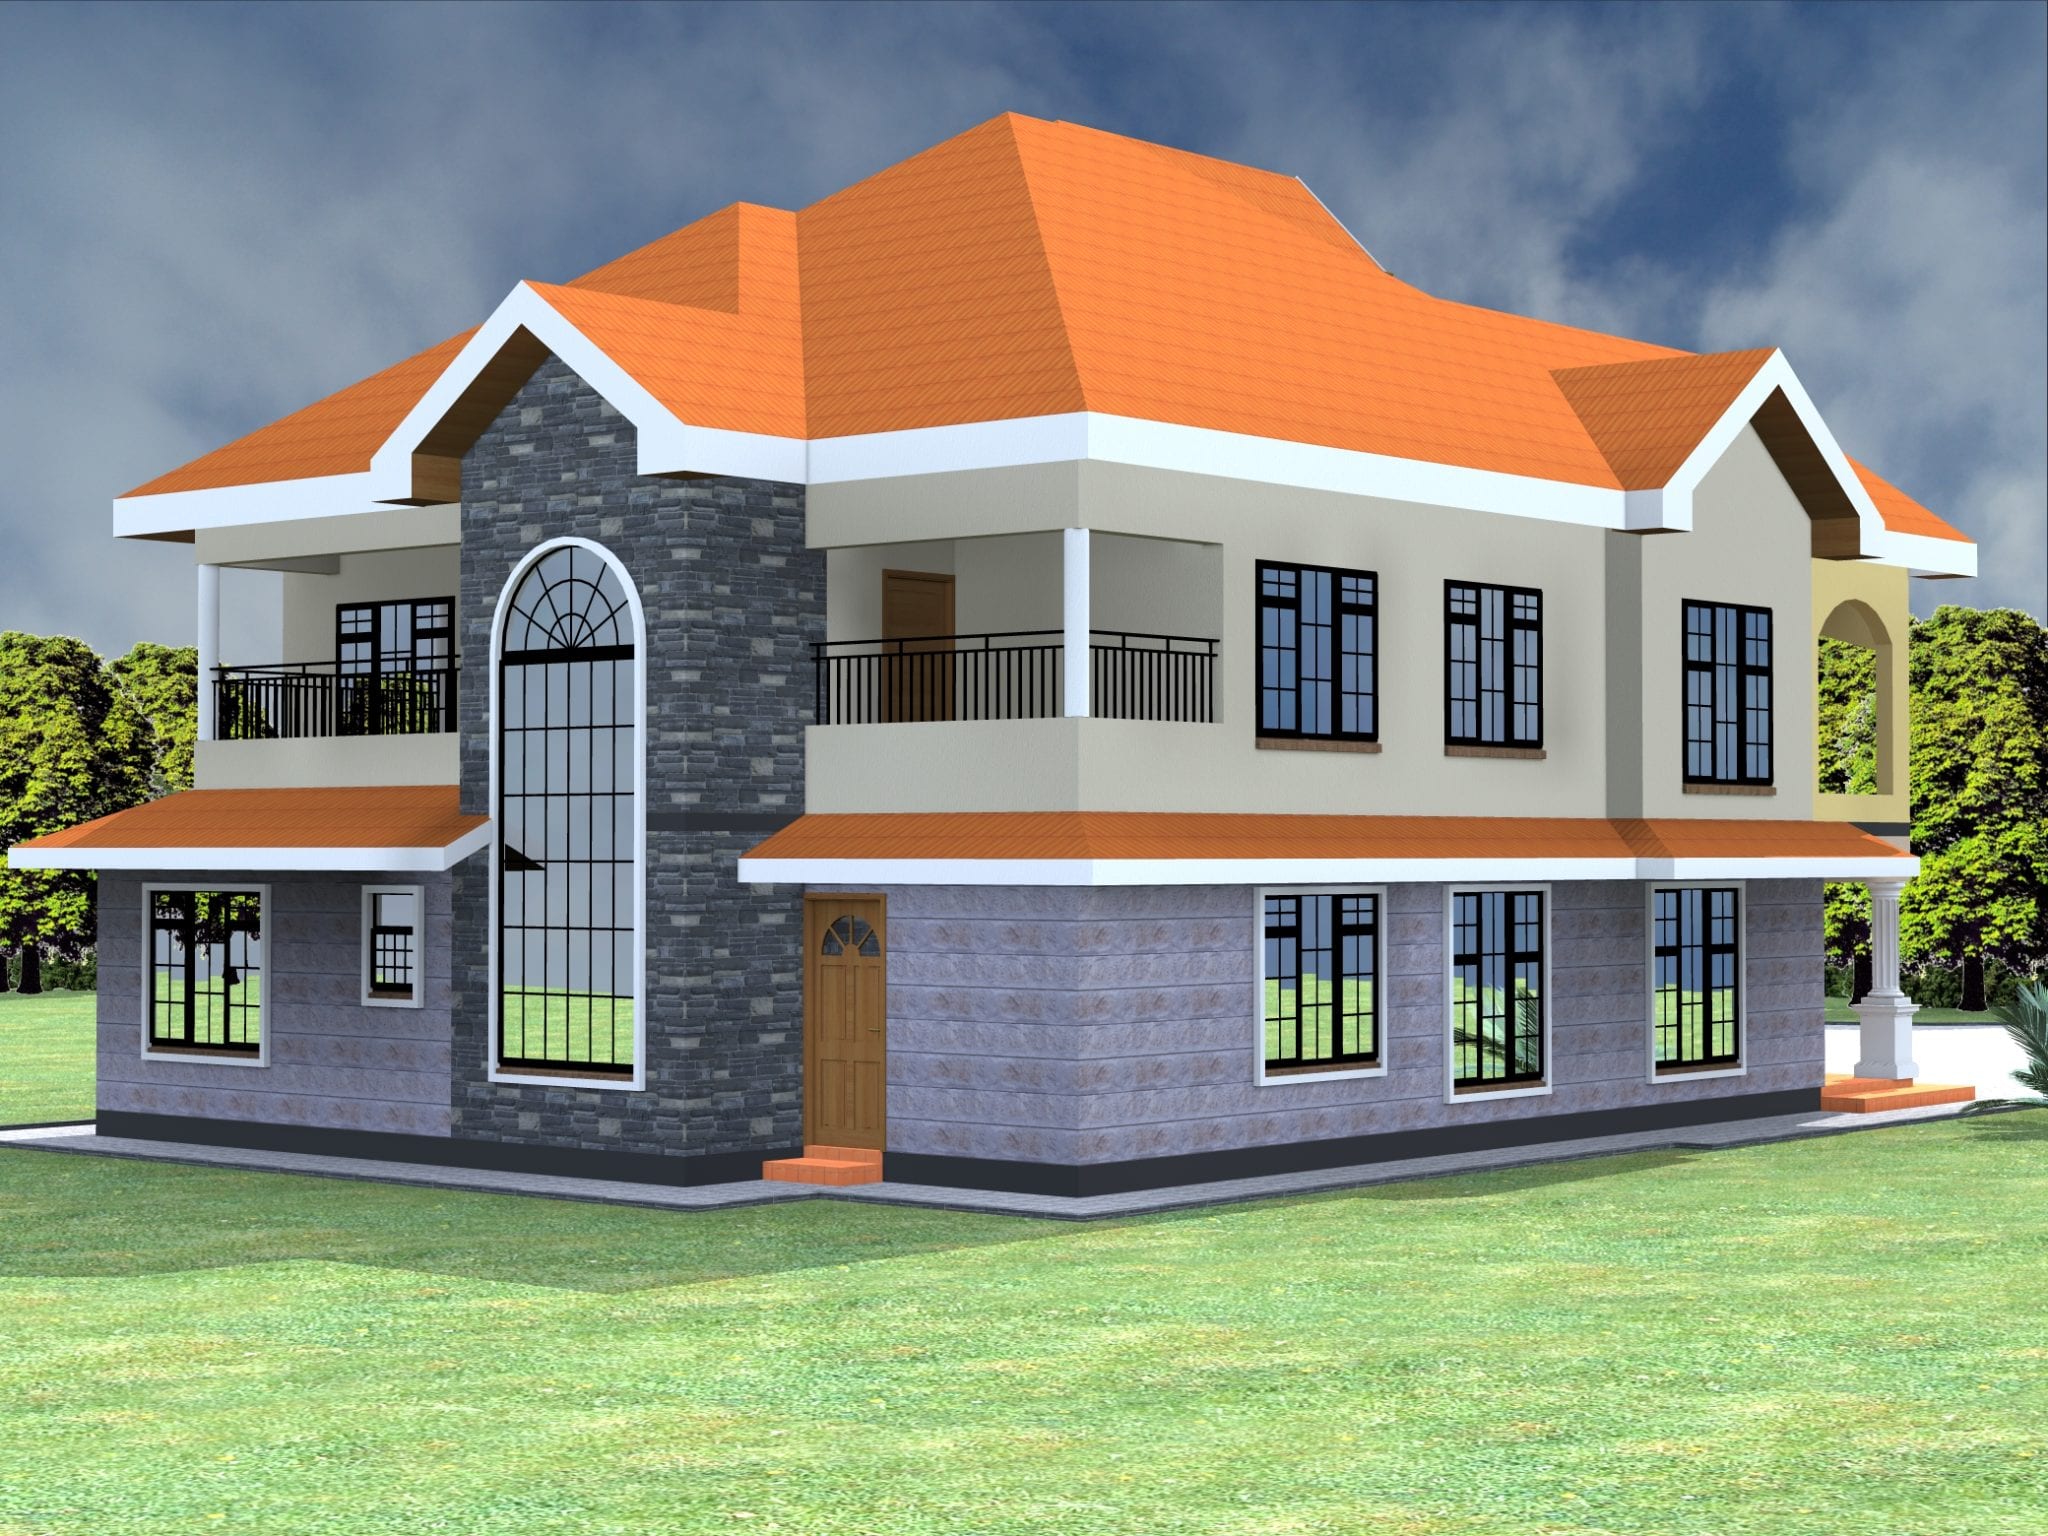 Simple Four Bedroom House Plans Designs |HPD Consult